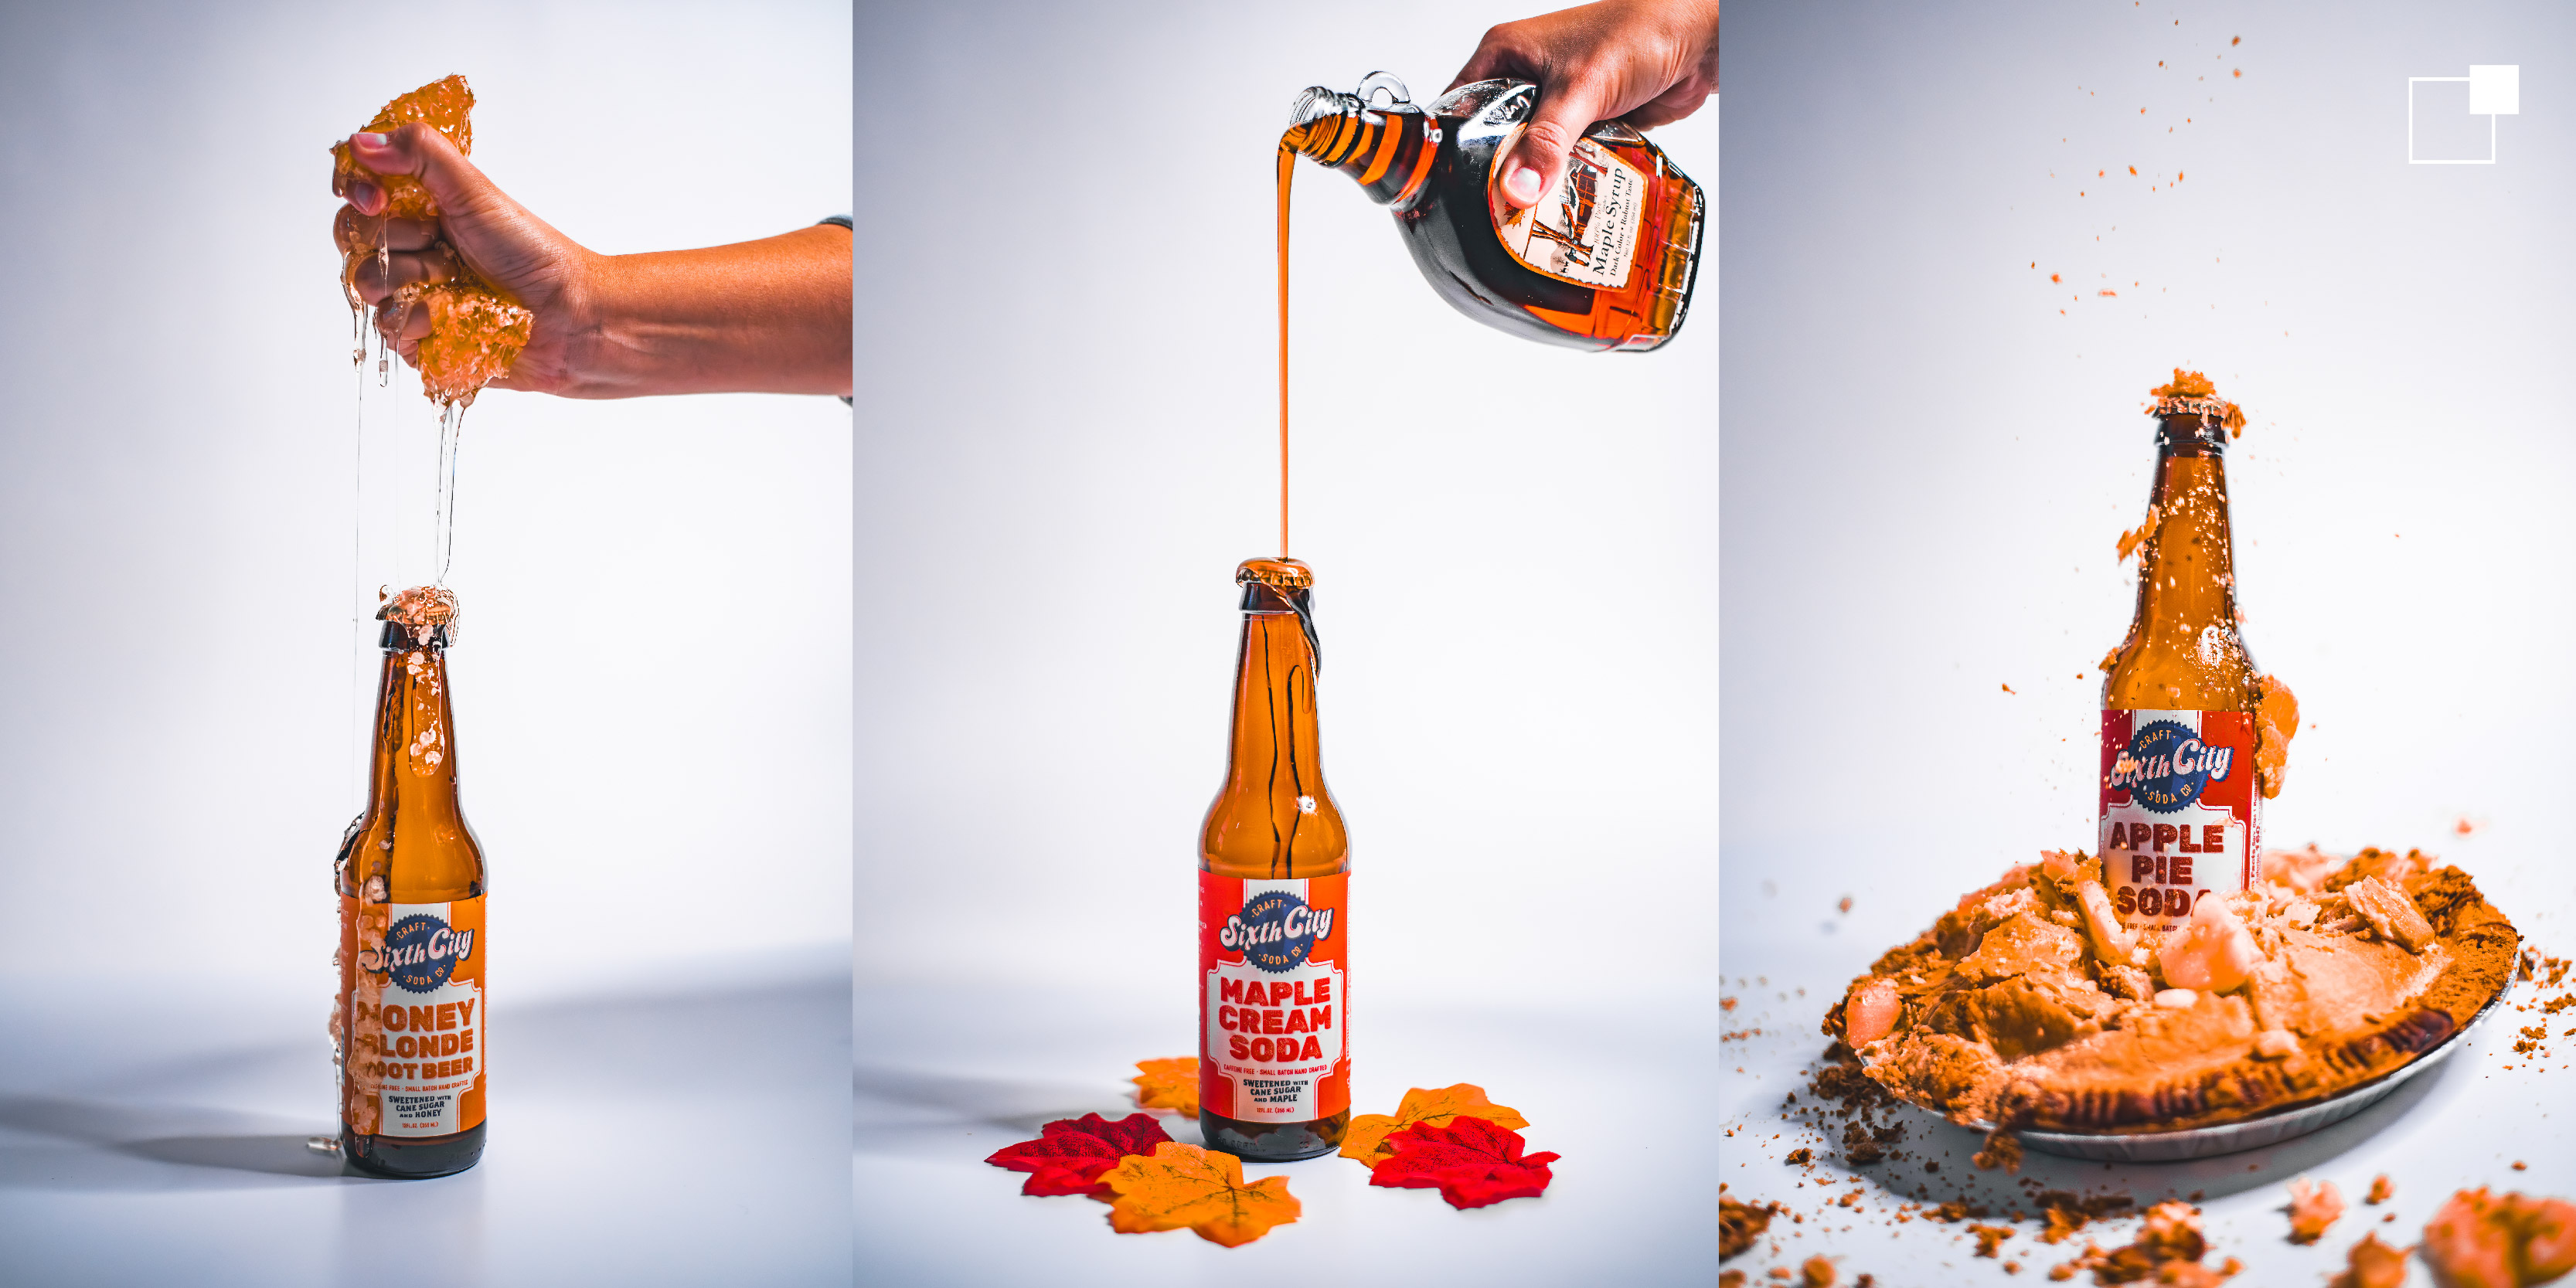 Honeycomb squeezed onto soda bottle, maple syrup pouring onto soda bottle, soda bottle smashed into an apple pie